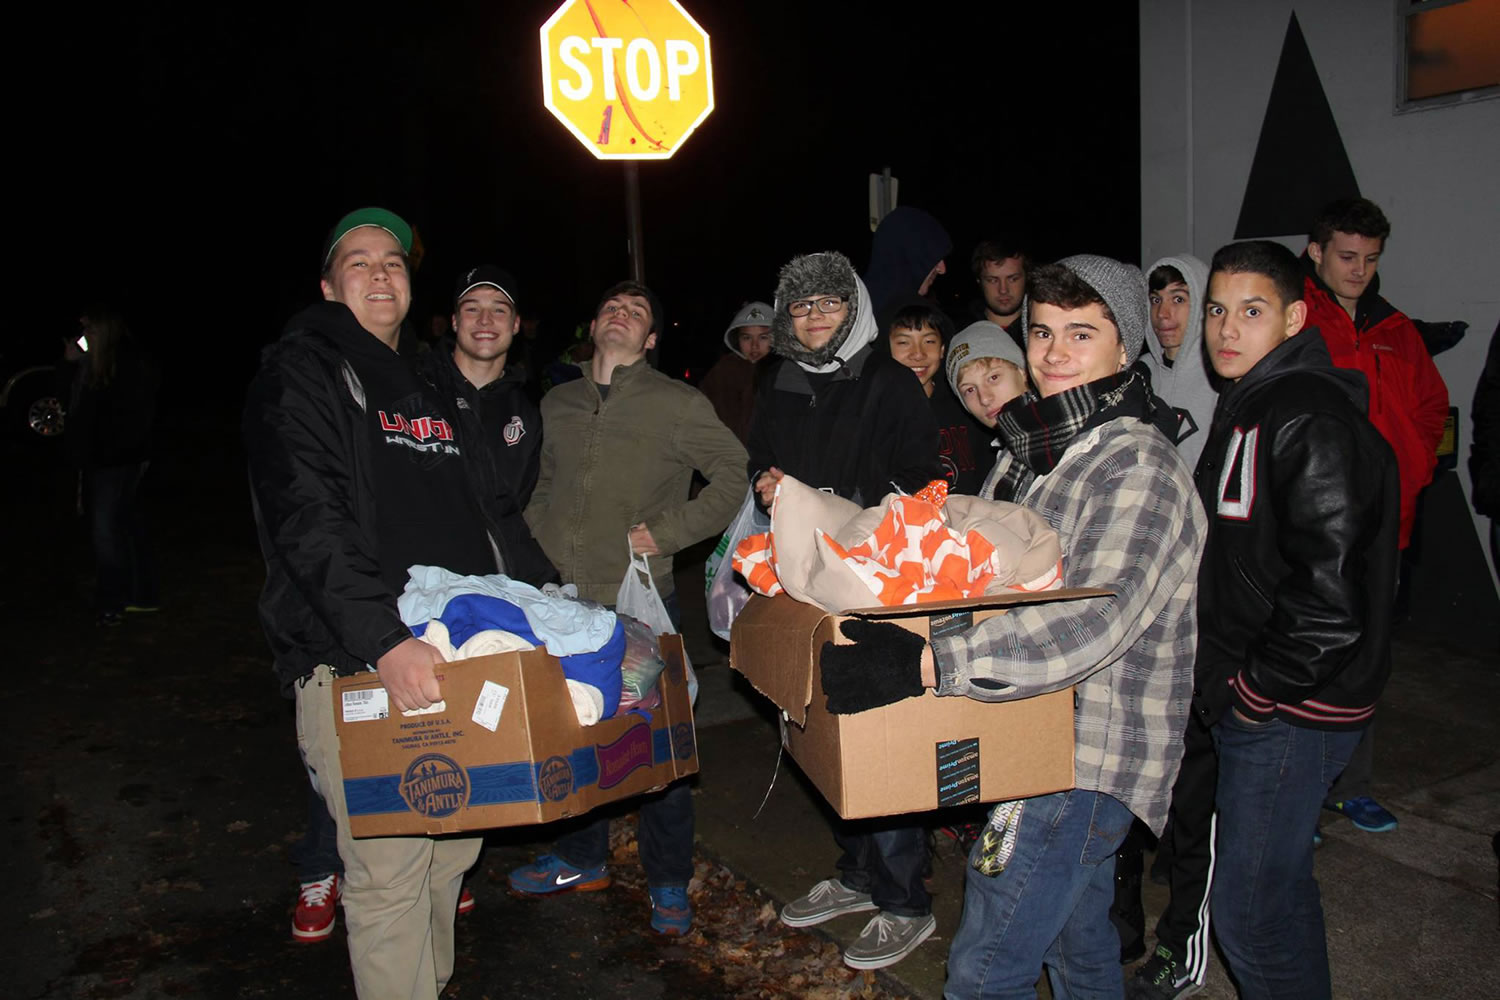 Camas: The Union High School wrestling team worked with Community Embraced Northwest to provide winter blankets, coats, hats, gloves and socks to the homeless at Dignity Village in Portland.